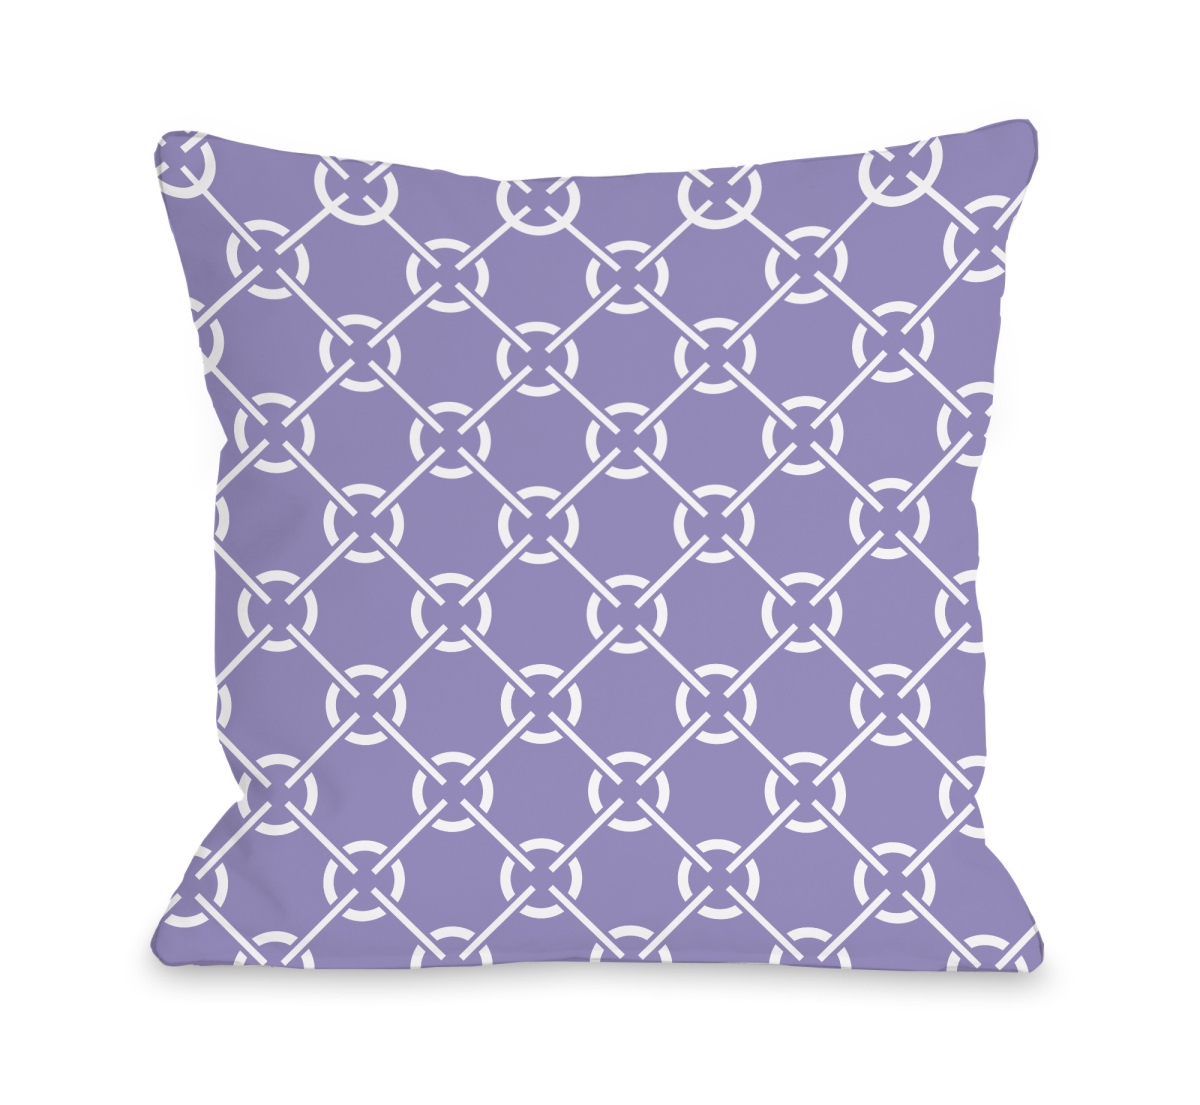 72219pl16o 16 X 16 In. Ceciles Circles Outdoor Pillow, Violet & Tulip